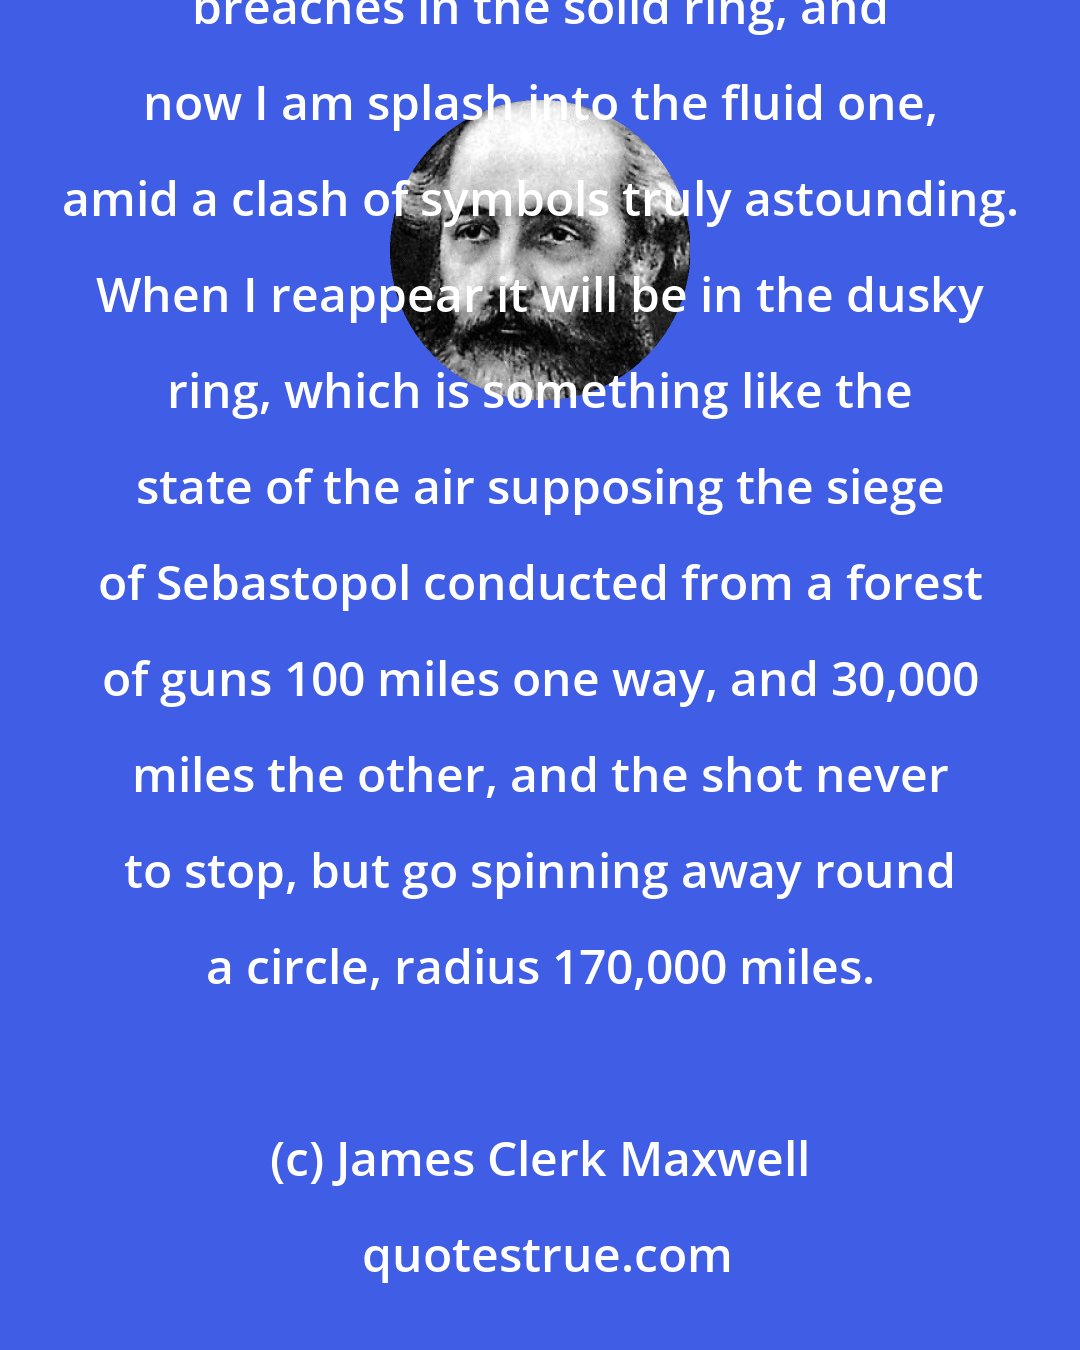 James Clerk Maxwell: I have been battering away at Saturn, returning to the charge every now and then. I have effected several breaches in the solid ring, and now I am splash into the fluid one, amid a clash of symbols truly astounding. When I reappear it will be in the dusky ring, which is something like the state of the air supposing the siege of Sebastopol conducted from a forest of guns 100 miles one way, and 30,000 miles the other, and the shot never to stop, but go spinning away round a circle, radius 170,000 miles.